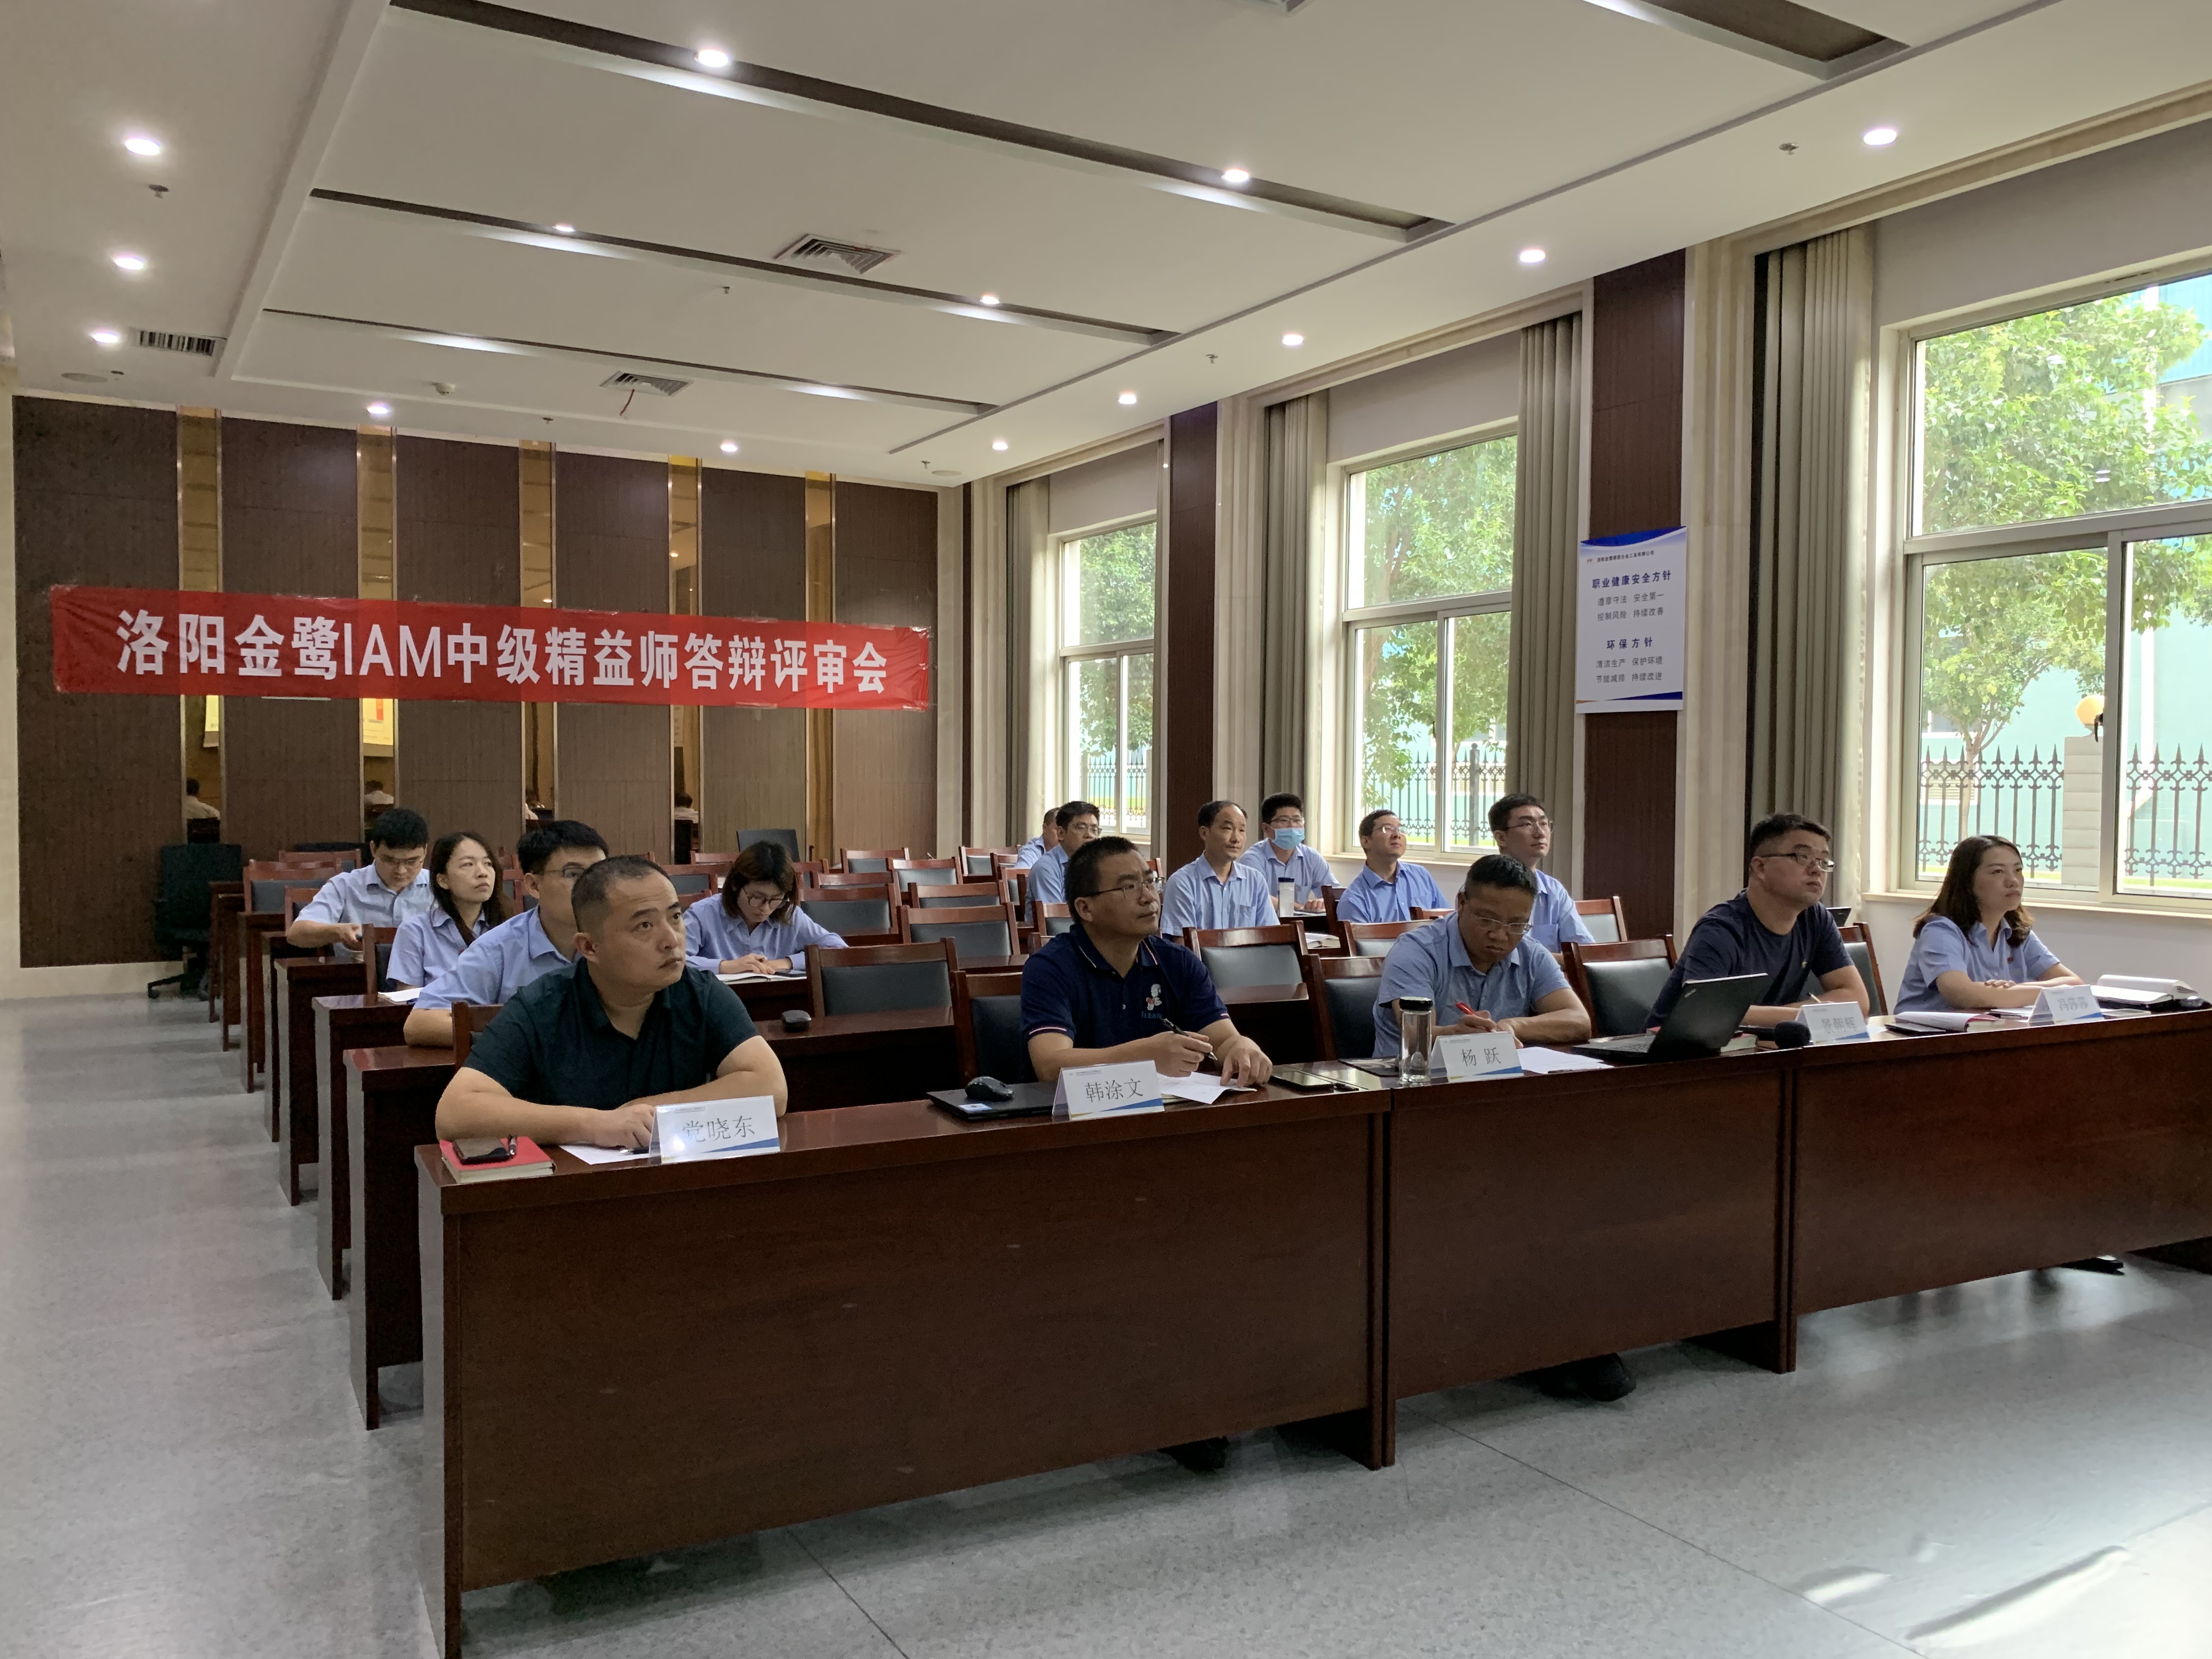 【Lean Topic】Luoyang Jinlu IAM Intermediate Lean Division Defense Review Meeting was successfully concluded